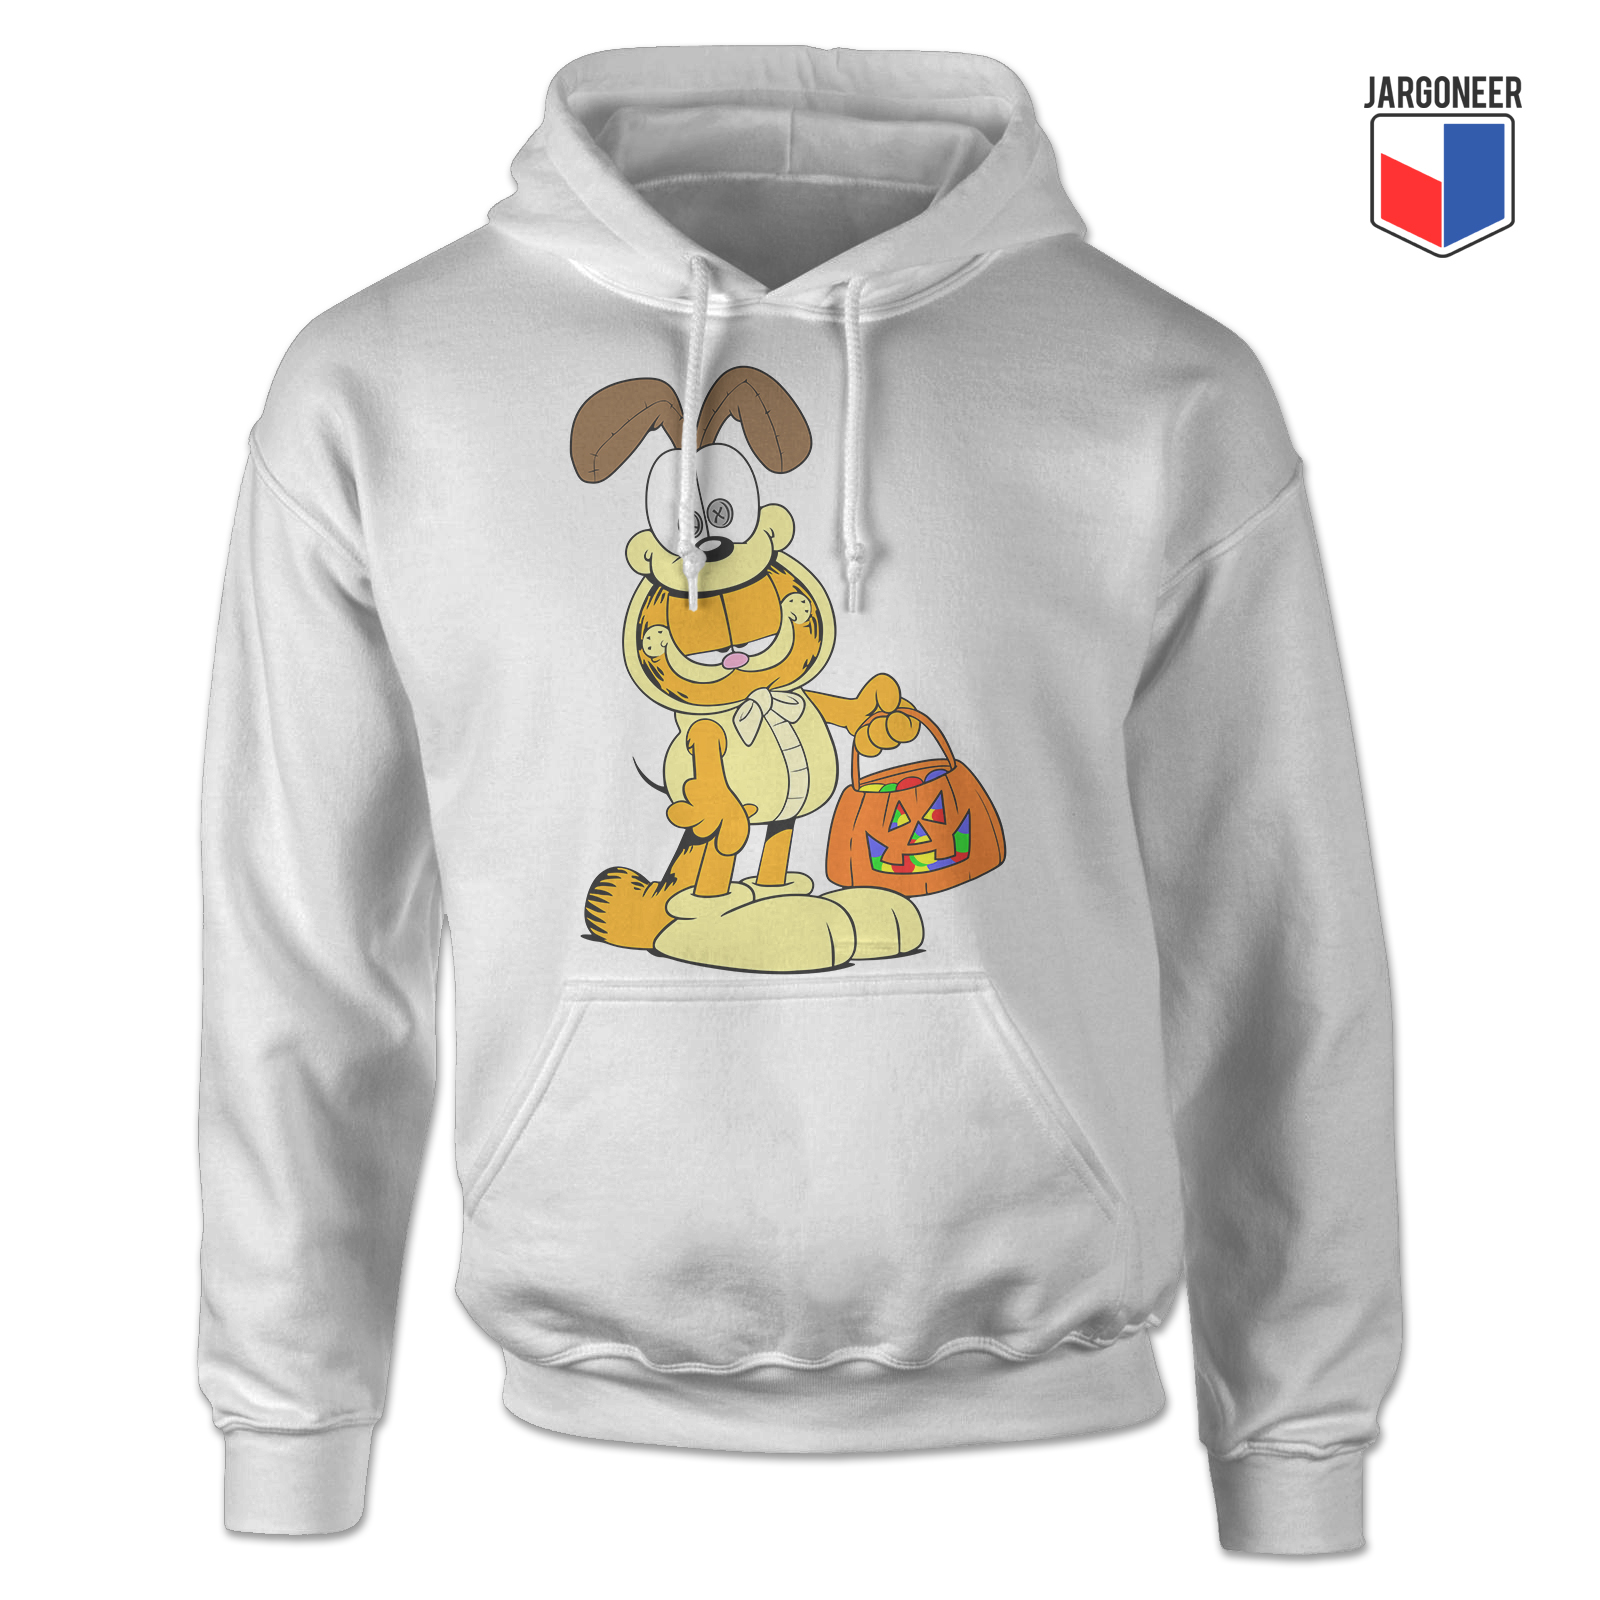 Garfield Inside Odie White Hoody - Shop Unique Graphic Cool Shirt Designs